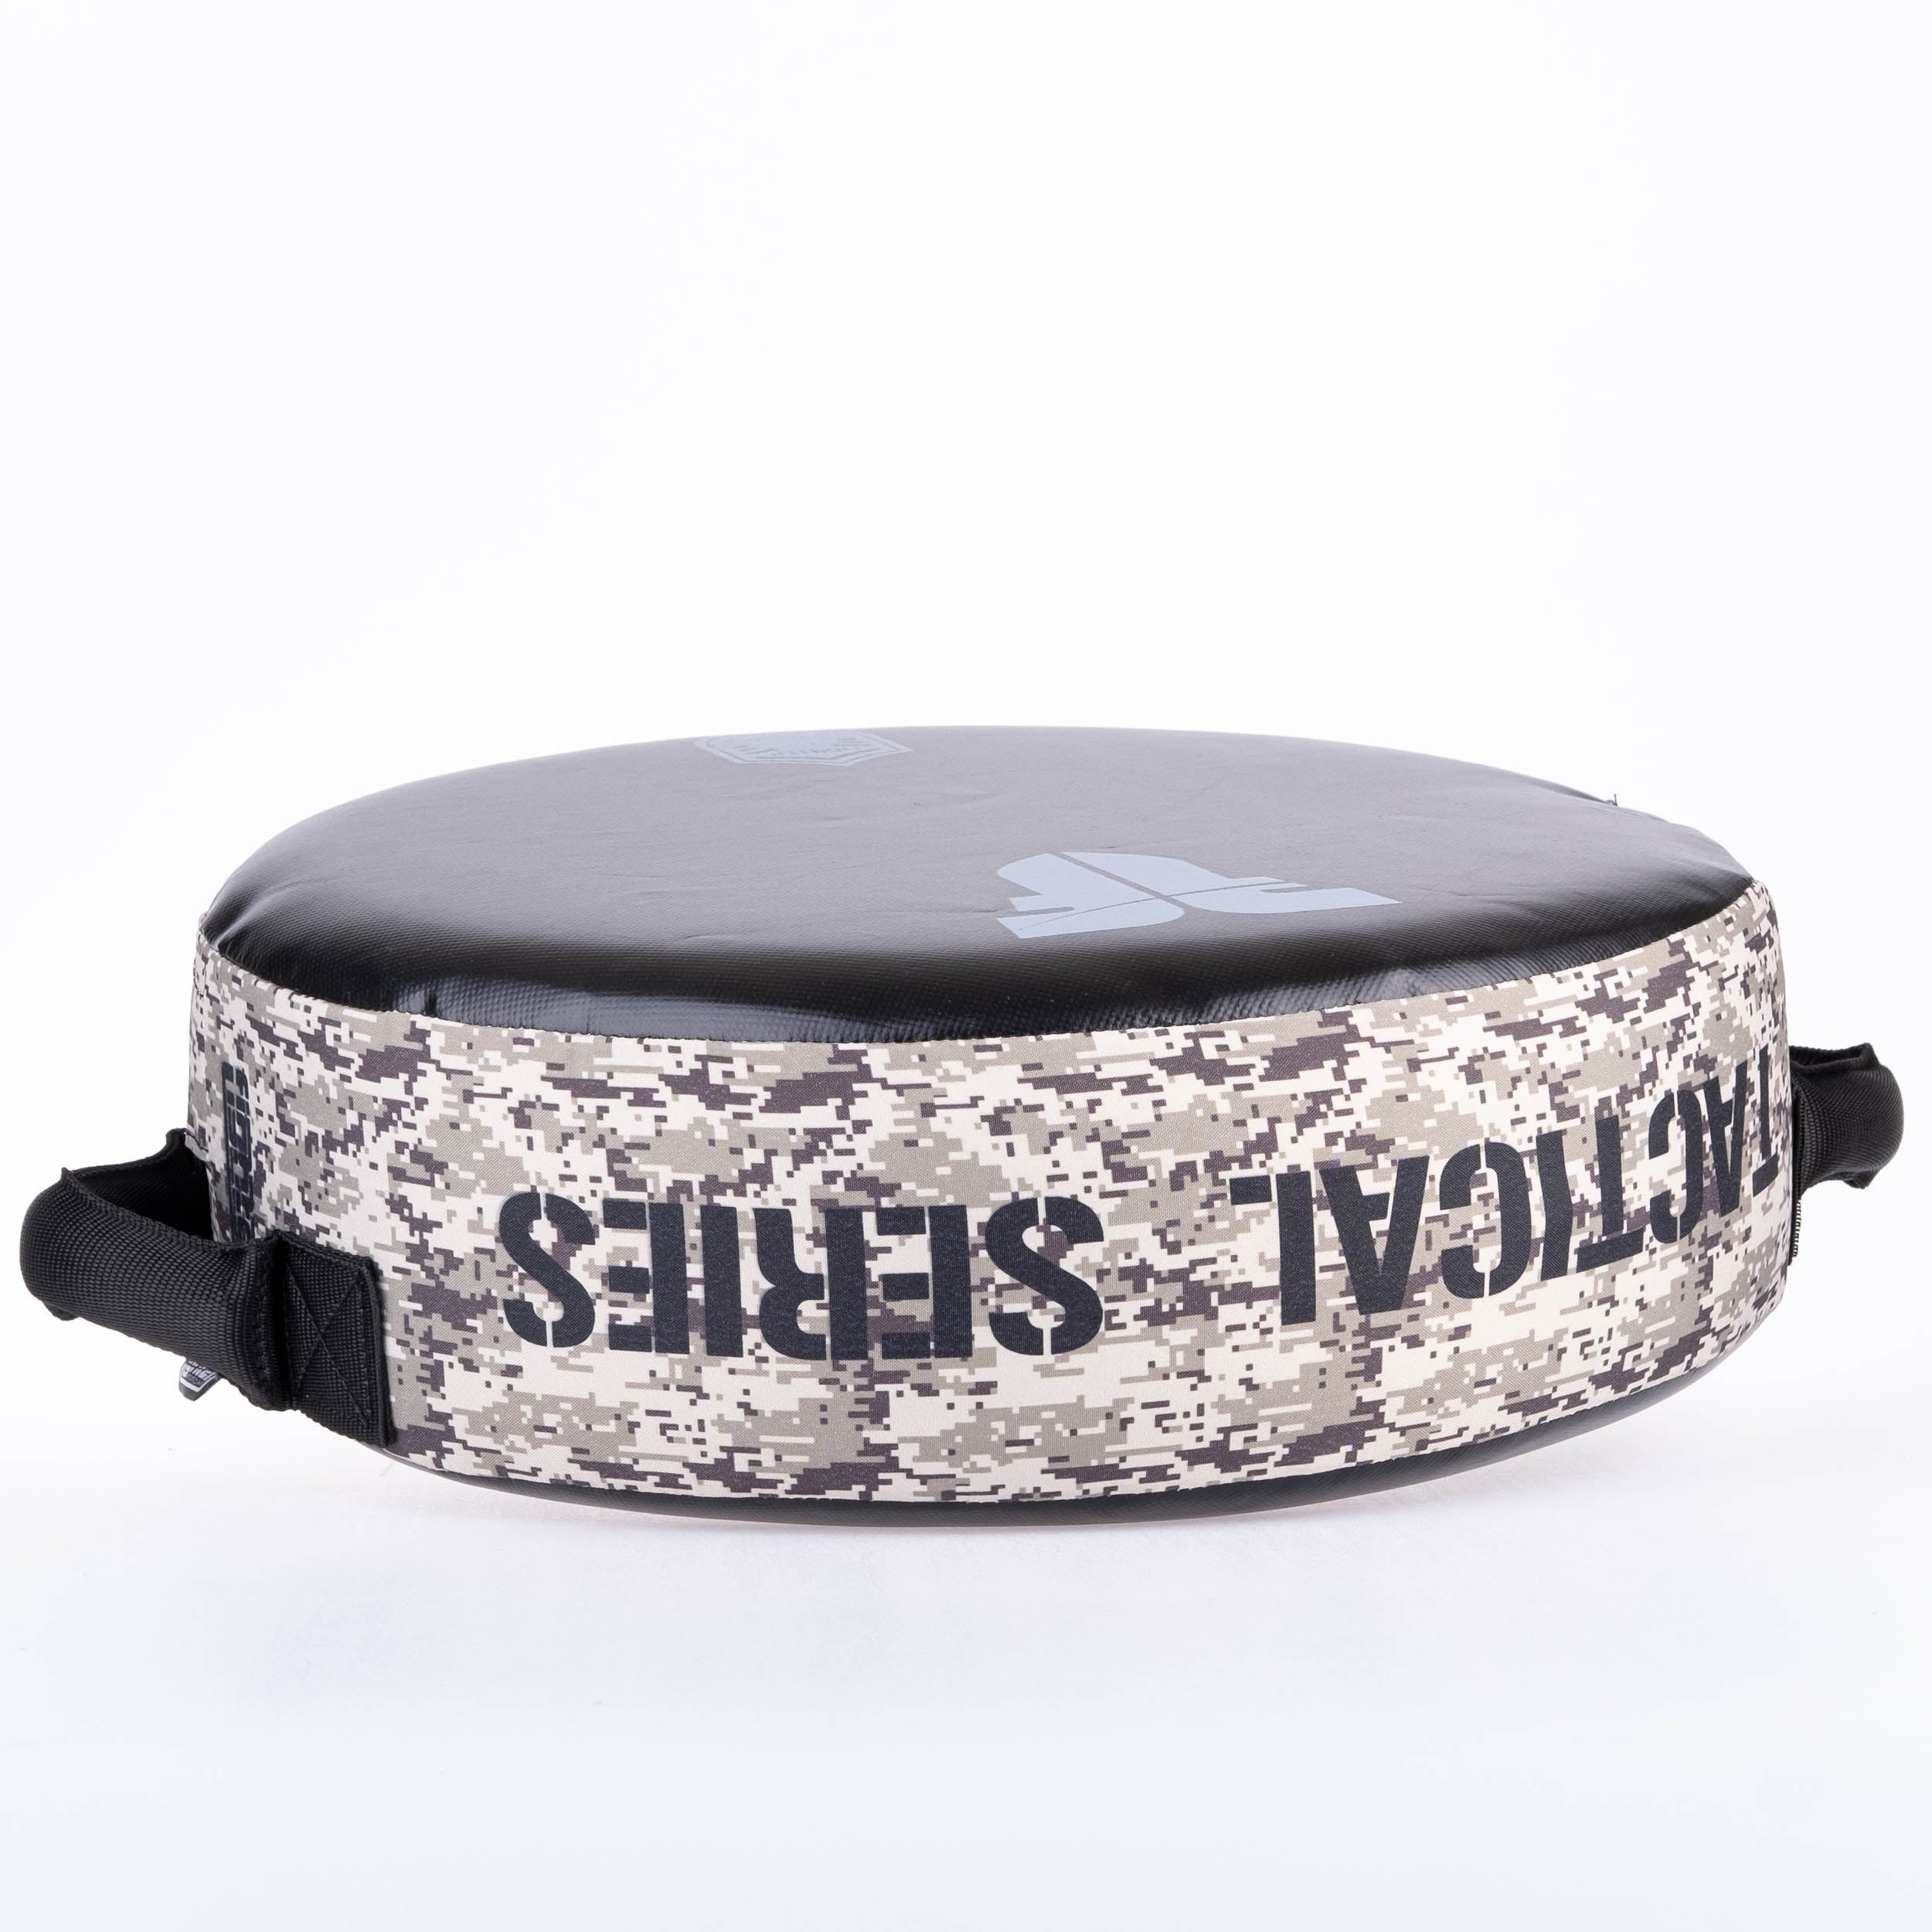 Products Fighter Round Shield - Tactical Series - Desert Camo, FKSH-34